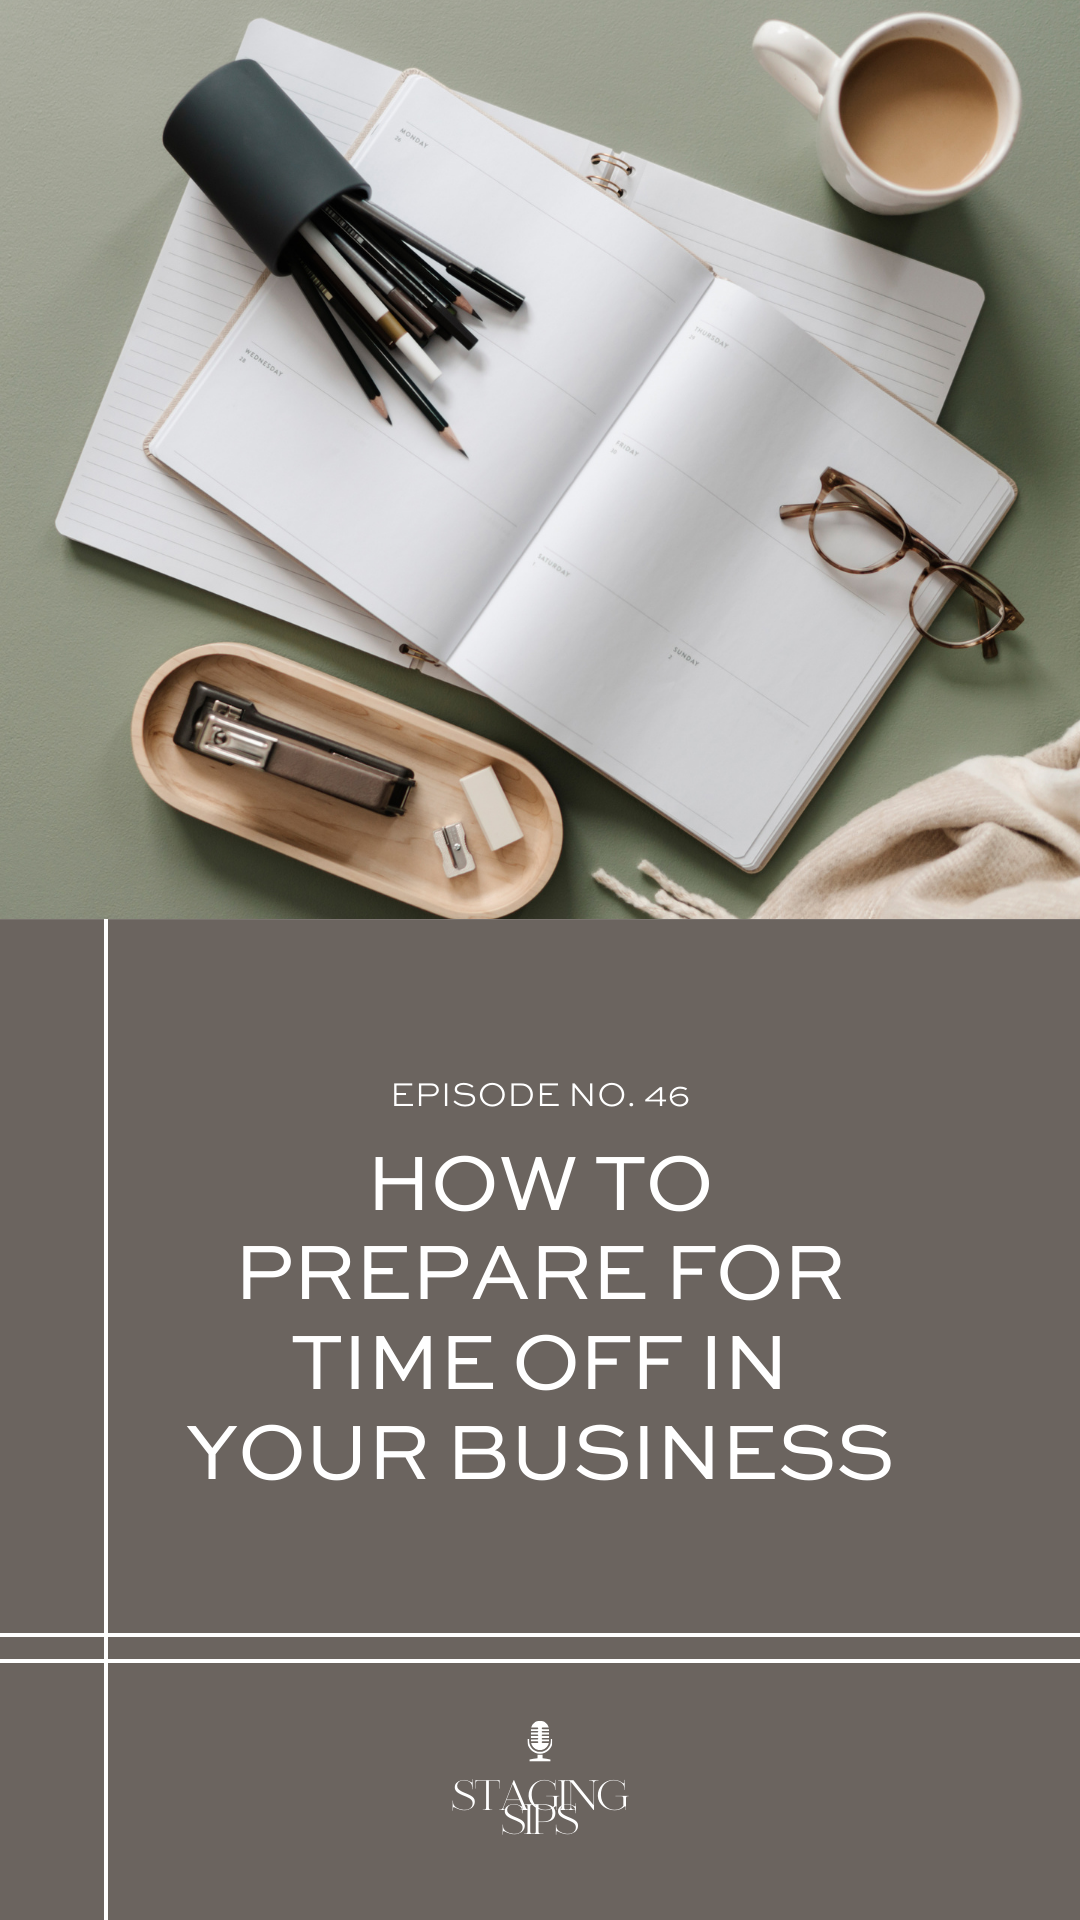 How to Prepare for Time Off in Your Business